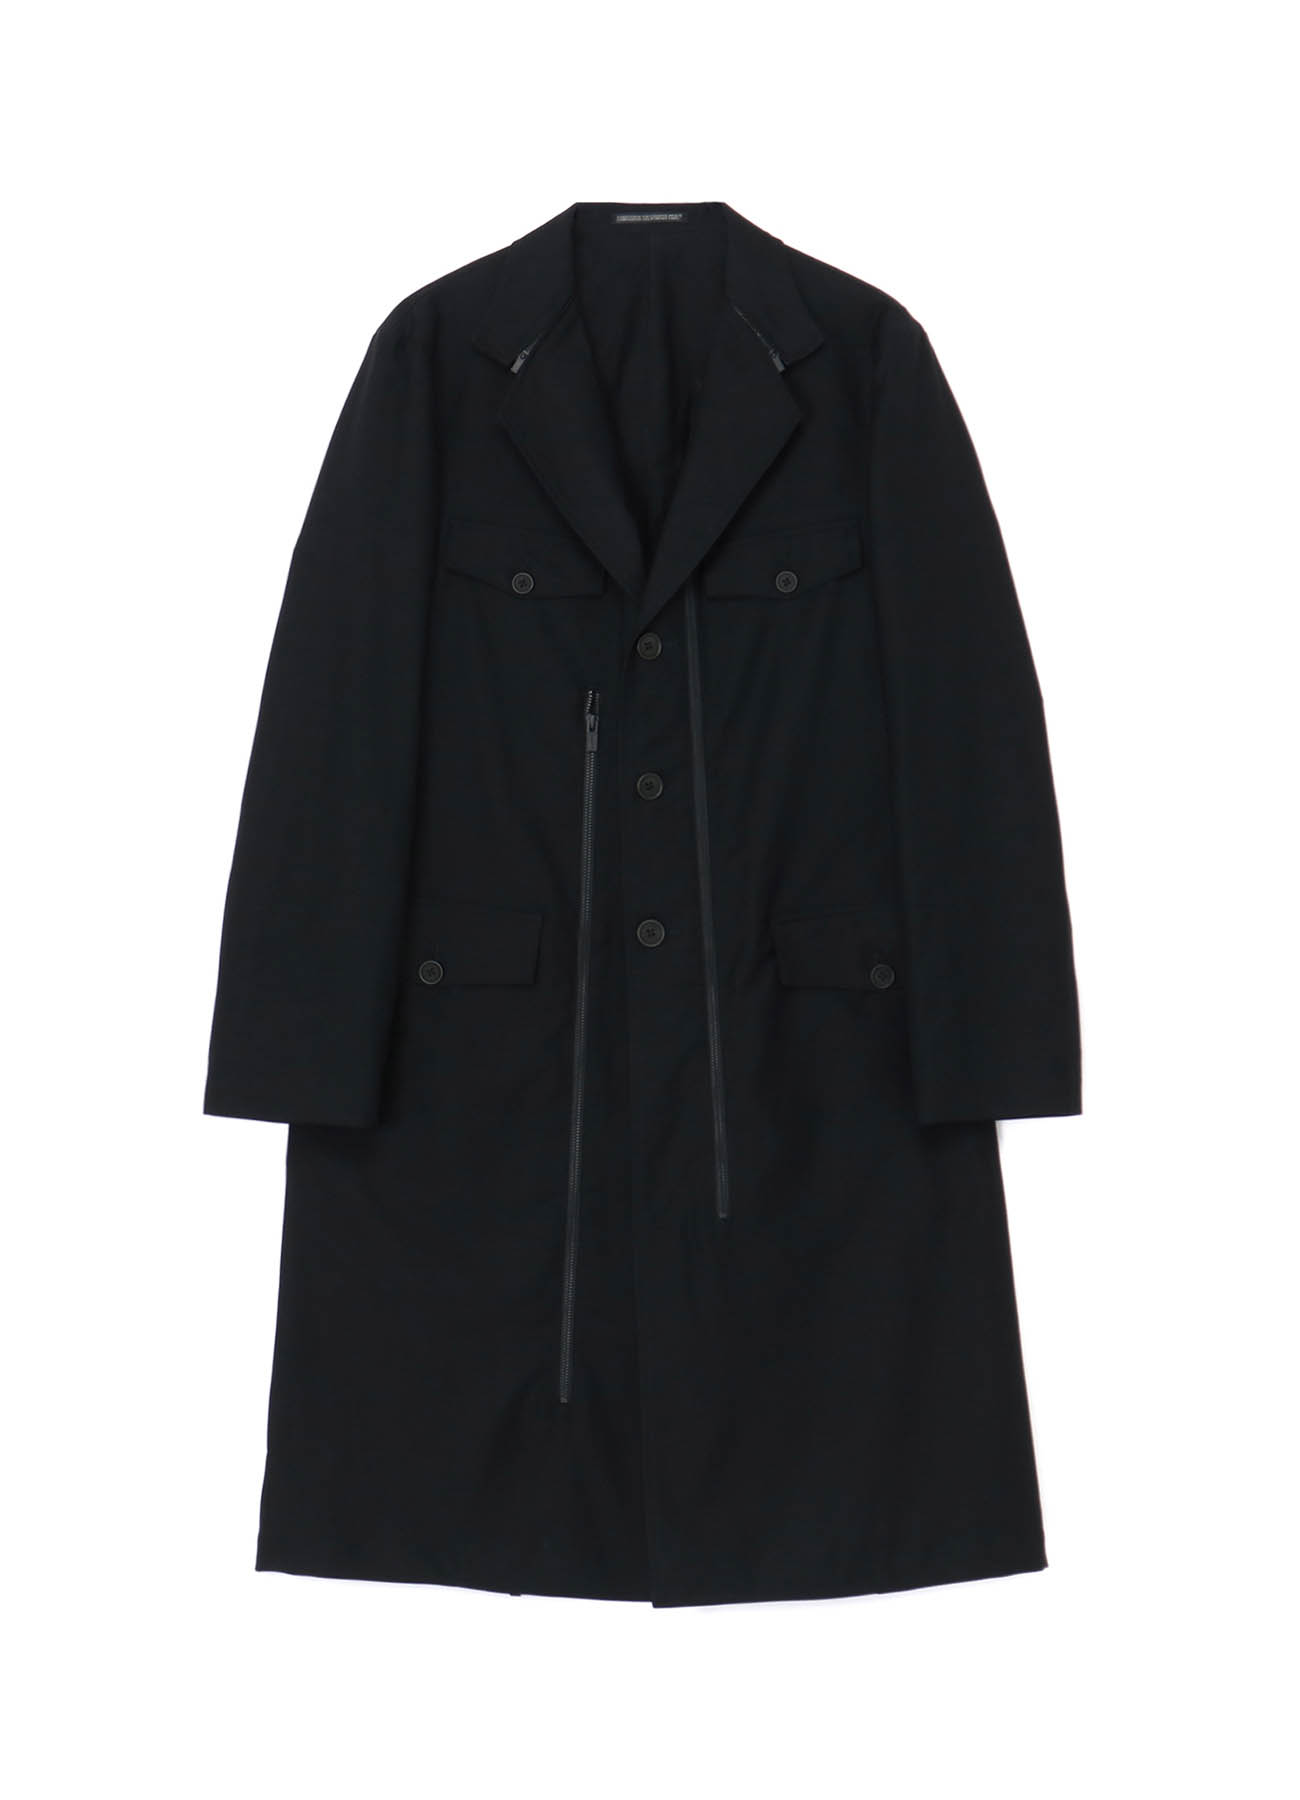 COTTON TWILL COAT WITH LONG ZIPPER DETAILS